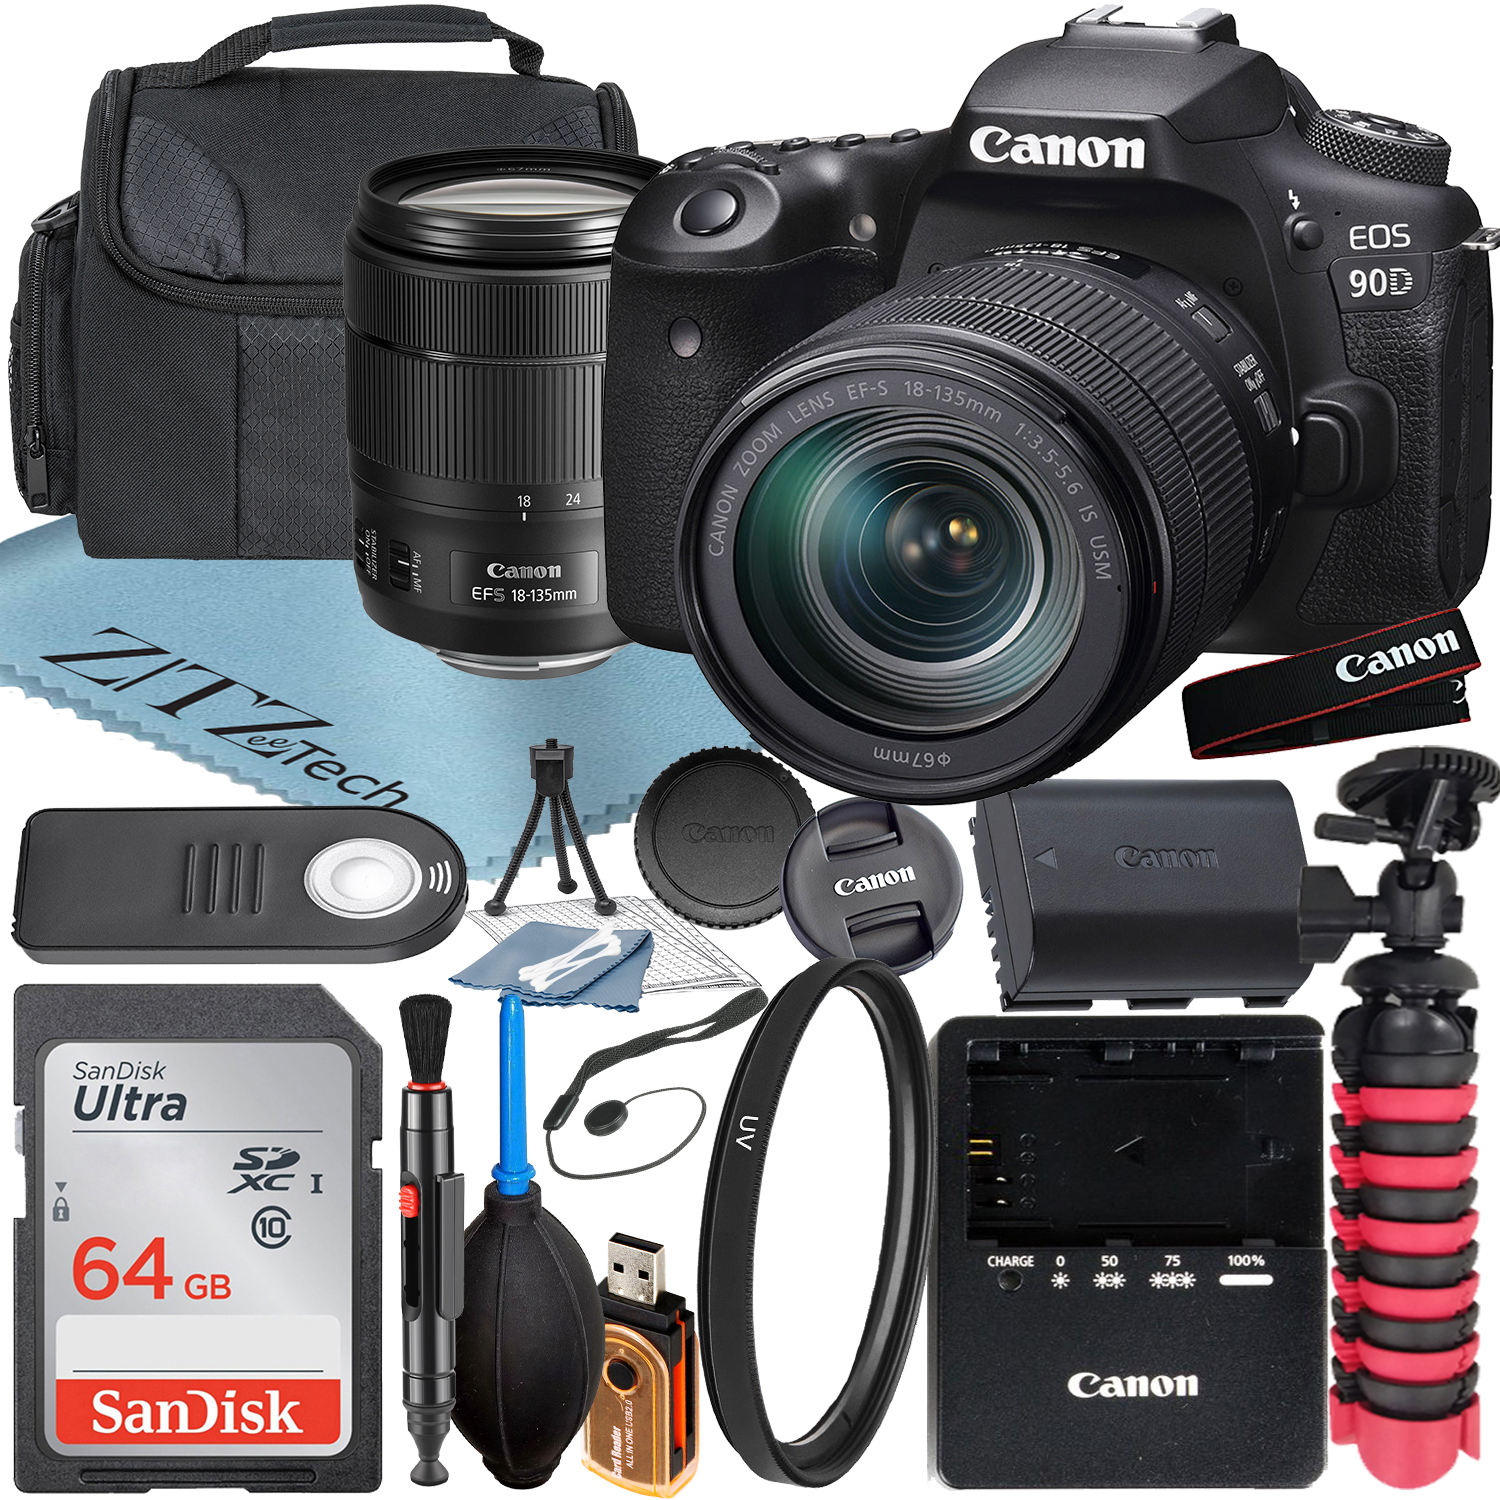 Canon EOS 90D DSLR Camera with 18-135mm IS USM Lens + SanDisk 64GB Memory Card + Case + UV Filter + ZeeTech Accessory Bundle